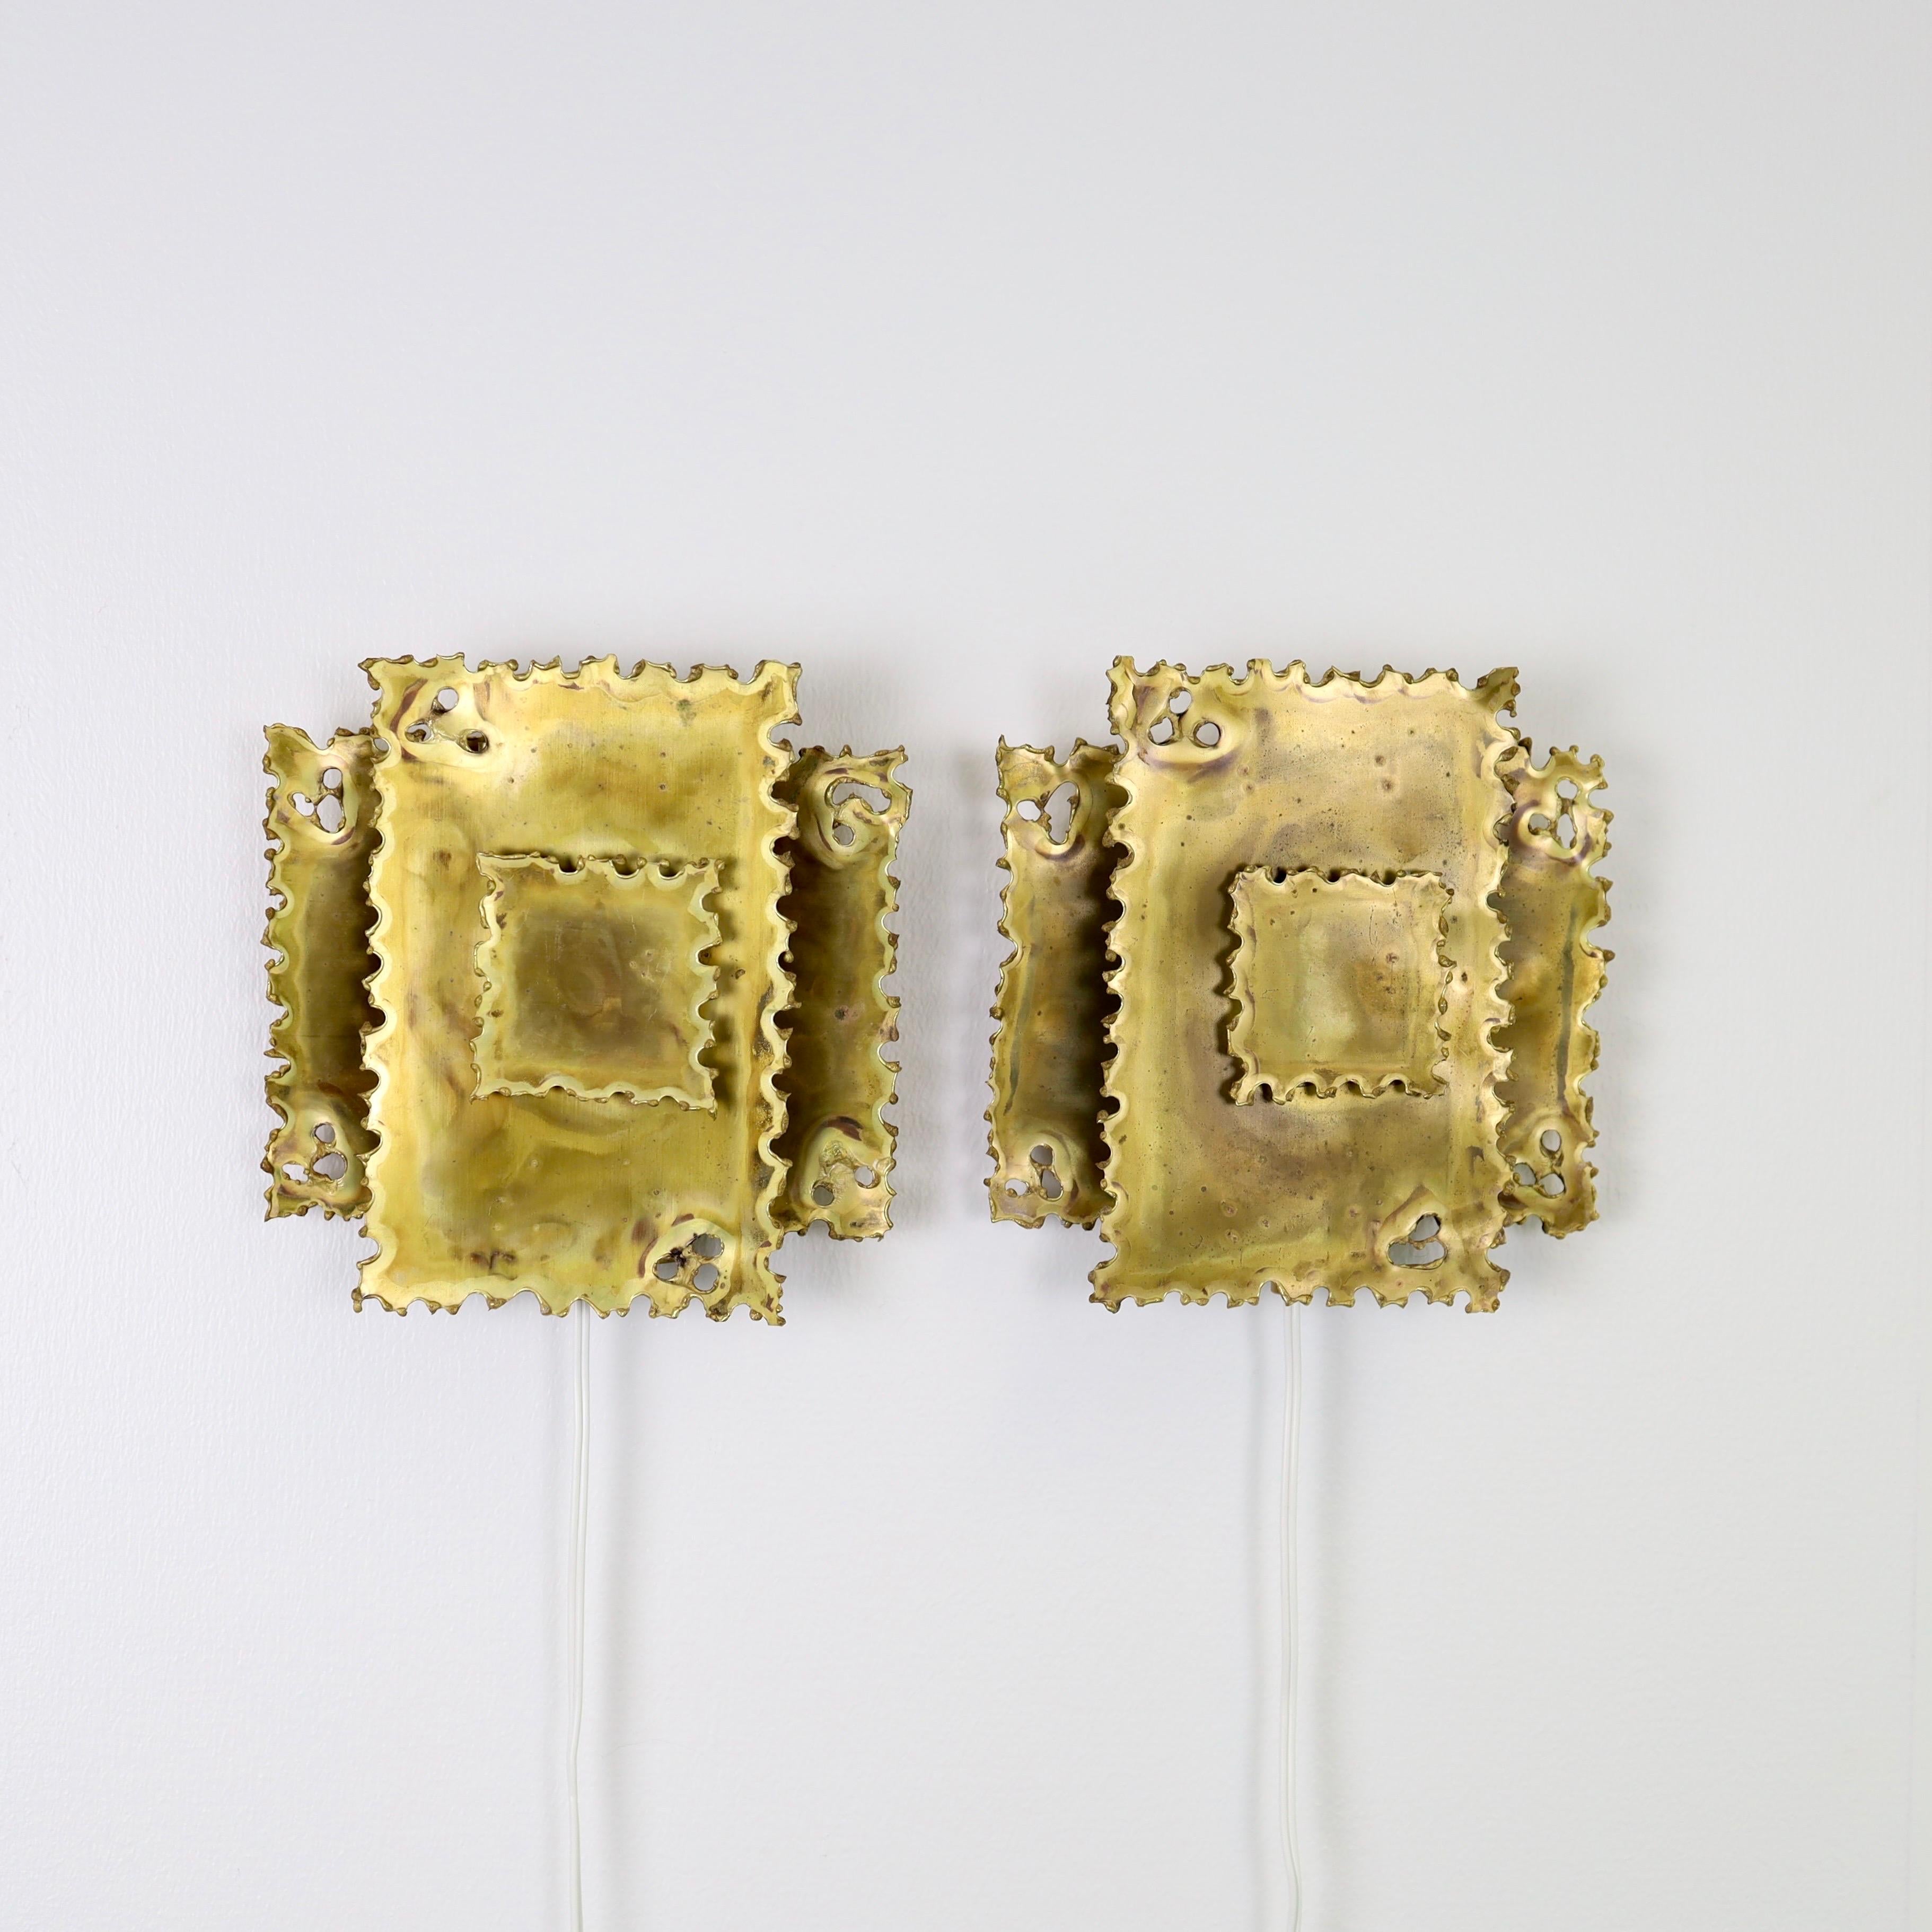 Pair of Square Brass Wall Lamps by Svend Aage Holm Sorensen, 1960s, Denmark In Good Condition For Sale In Værløse, DK